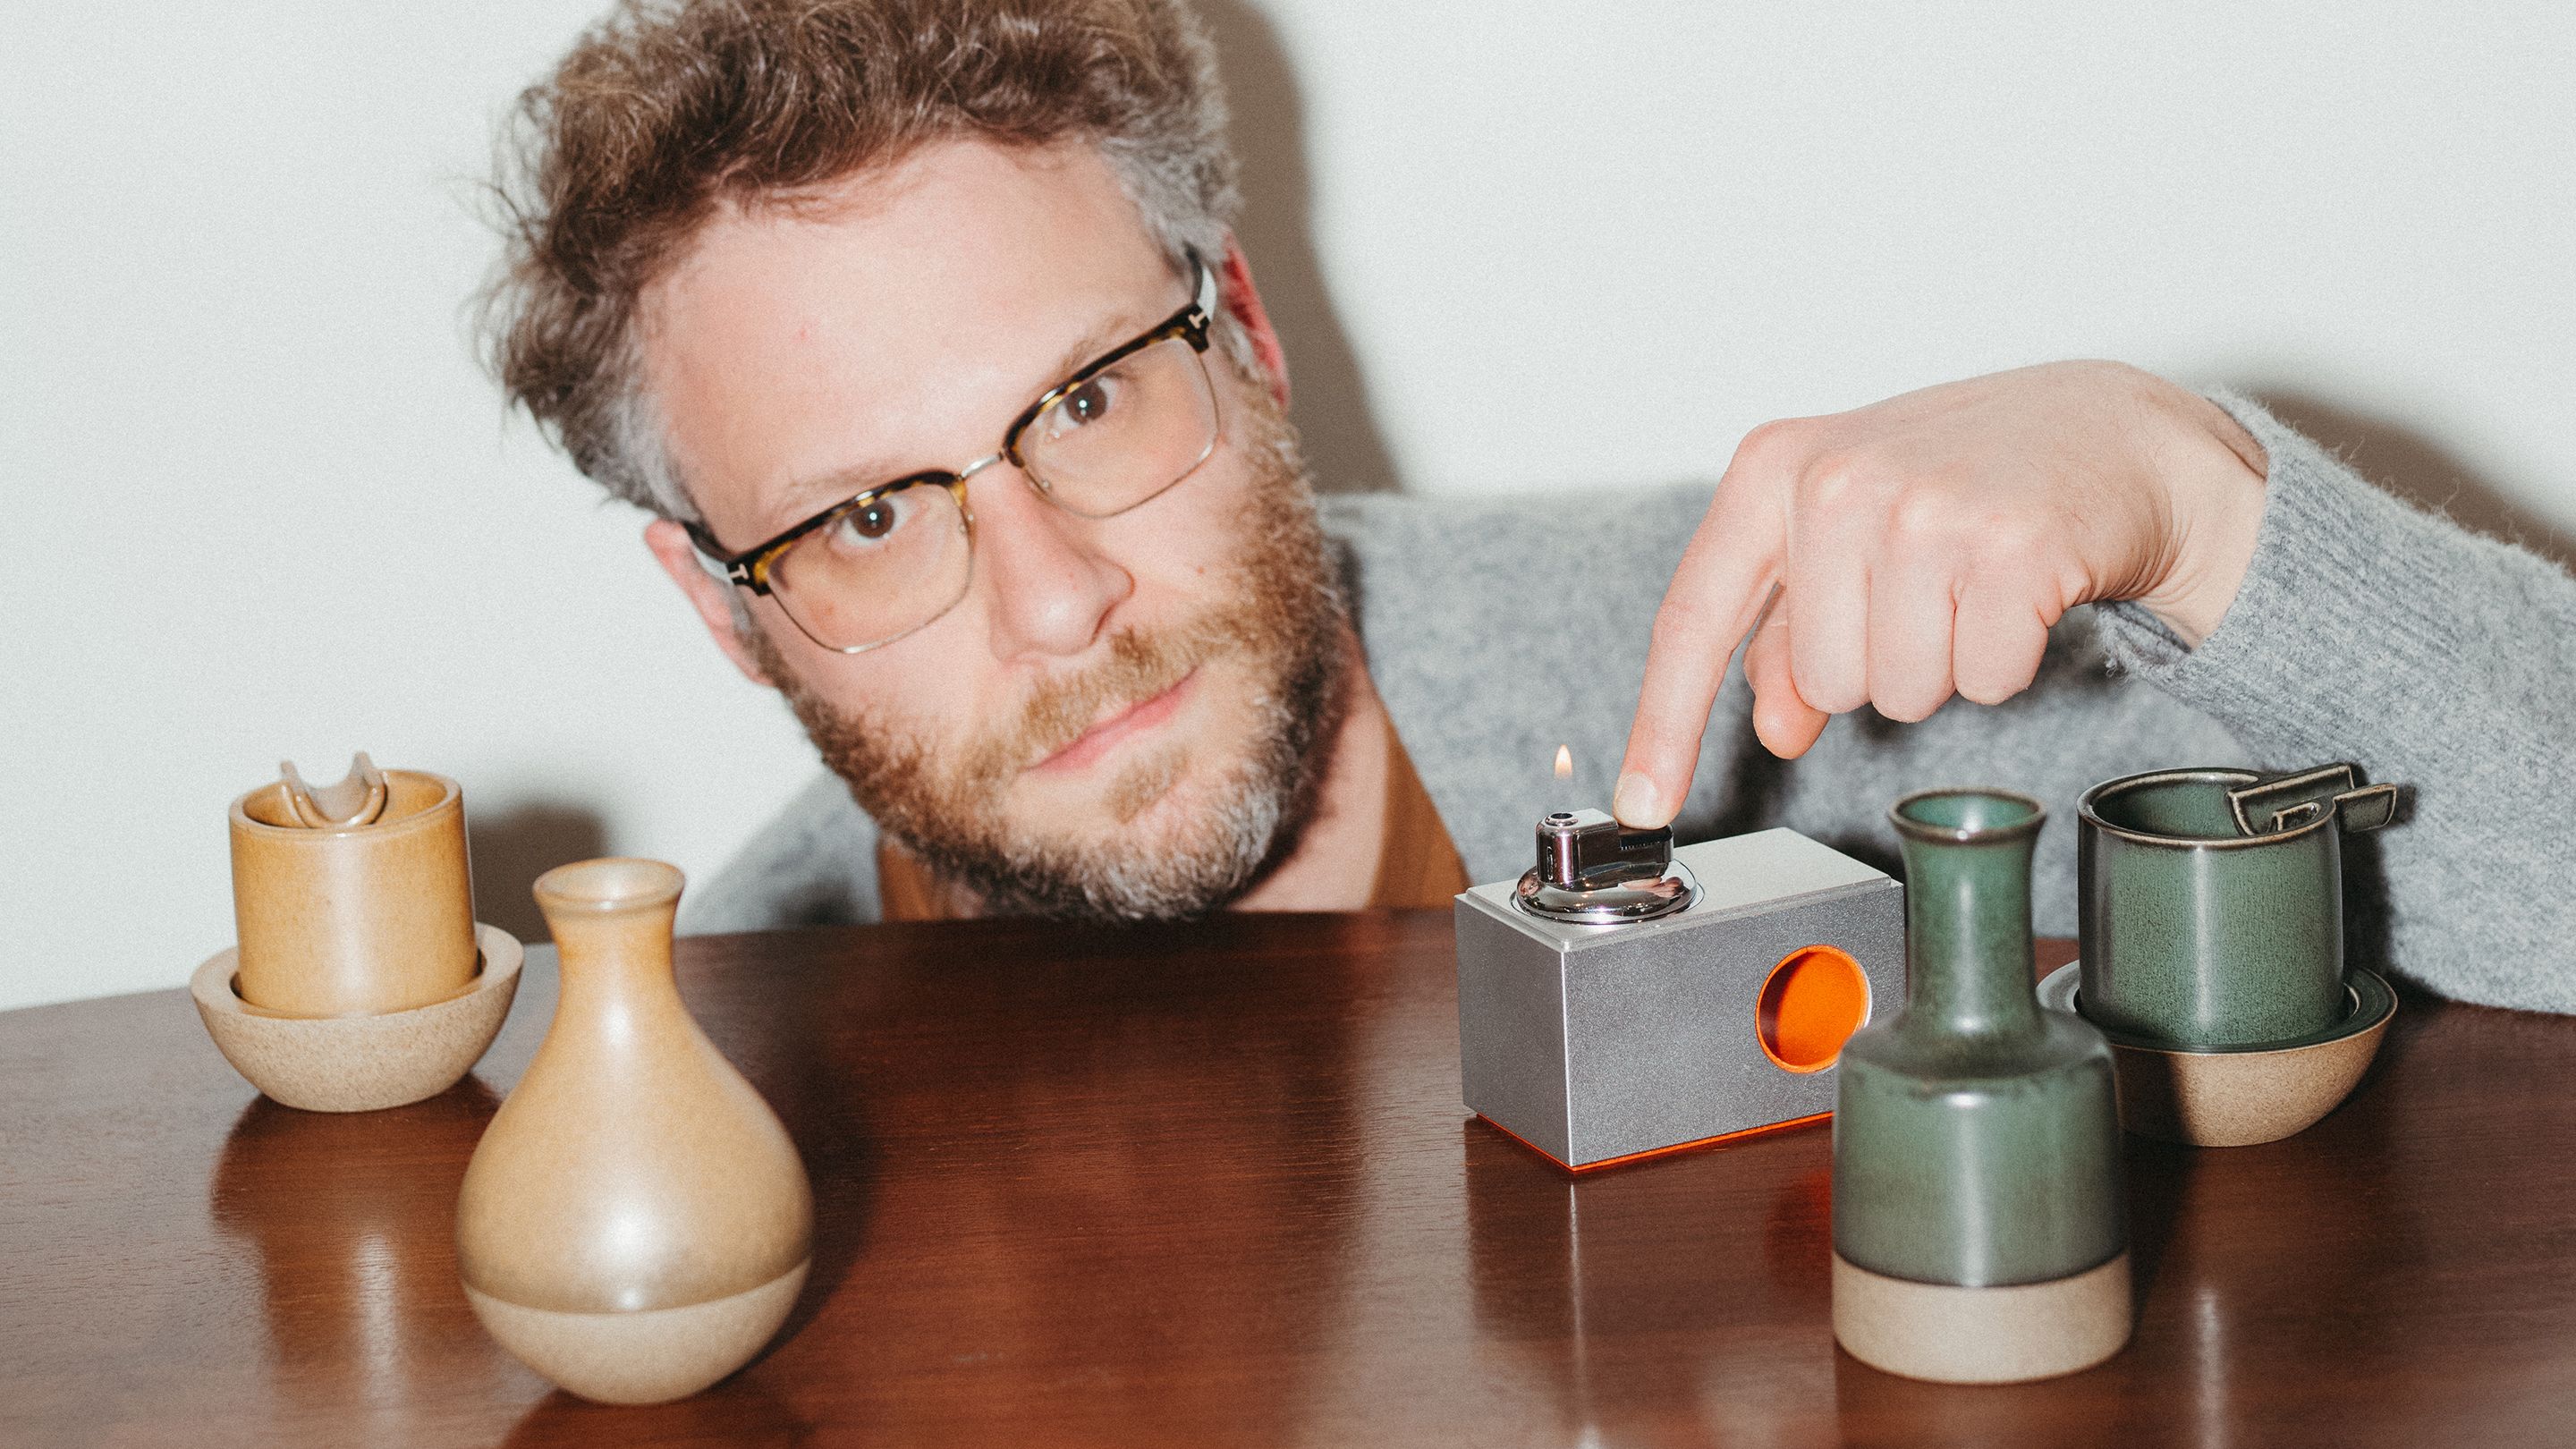 Seth Rogen says he'll trade one of his hand-made vases for Canucks